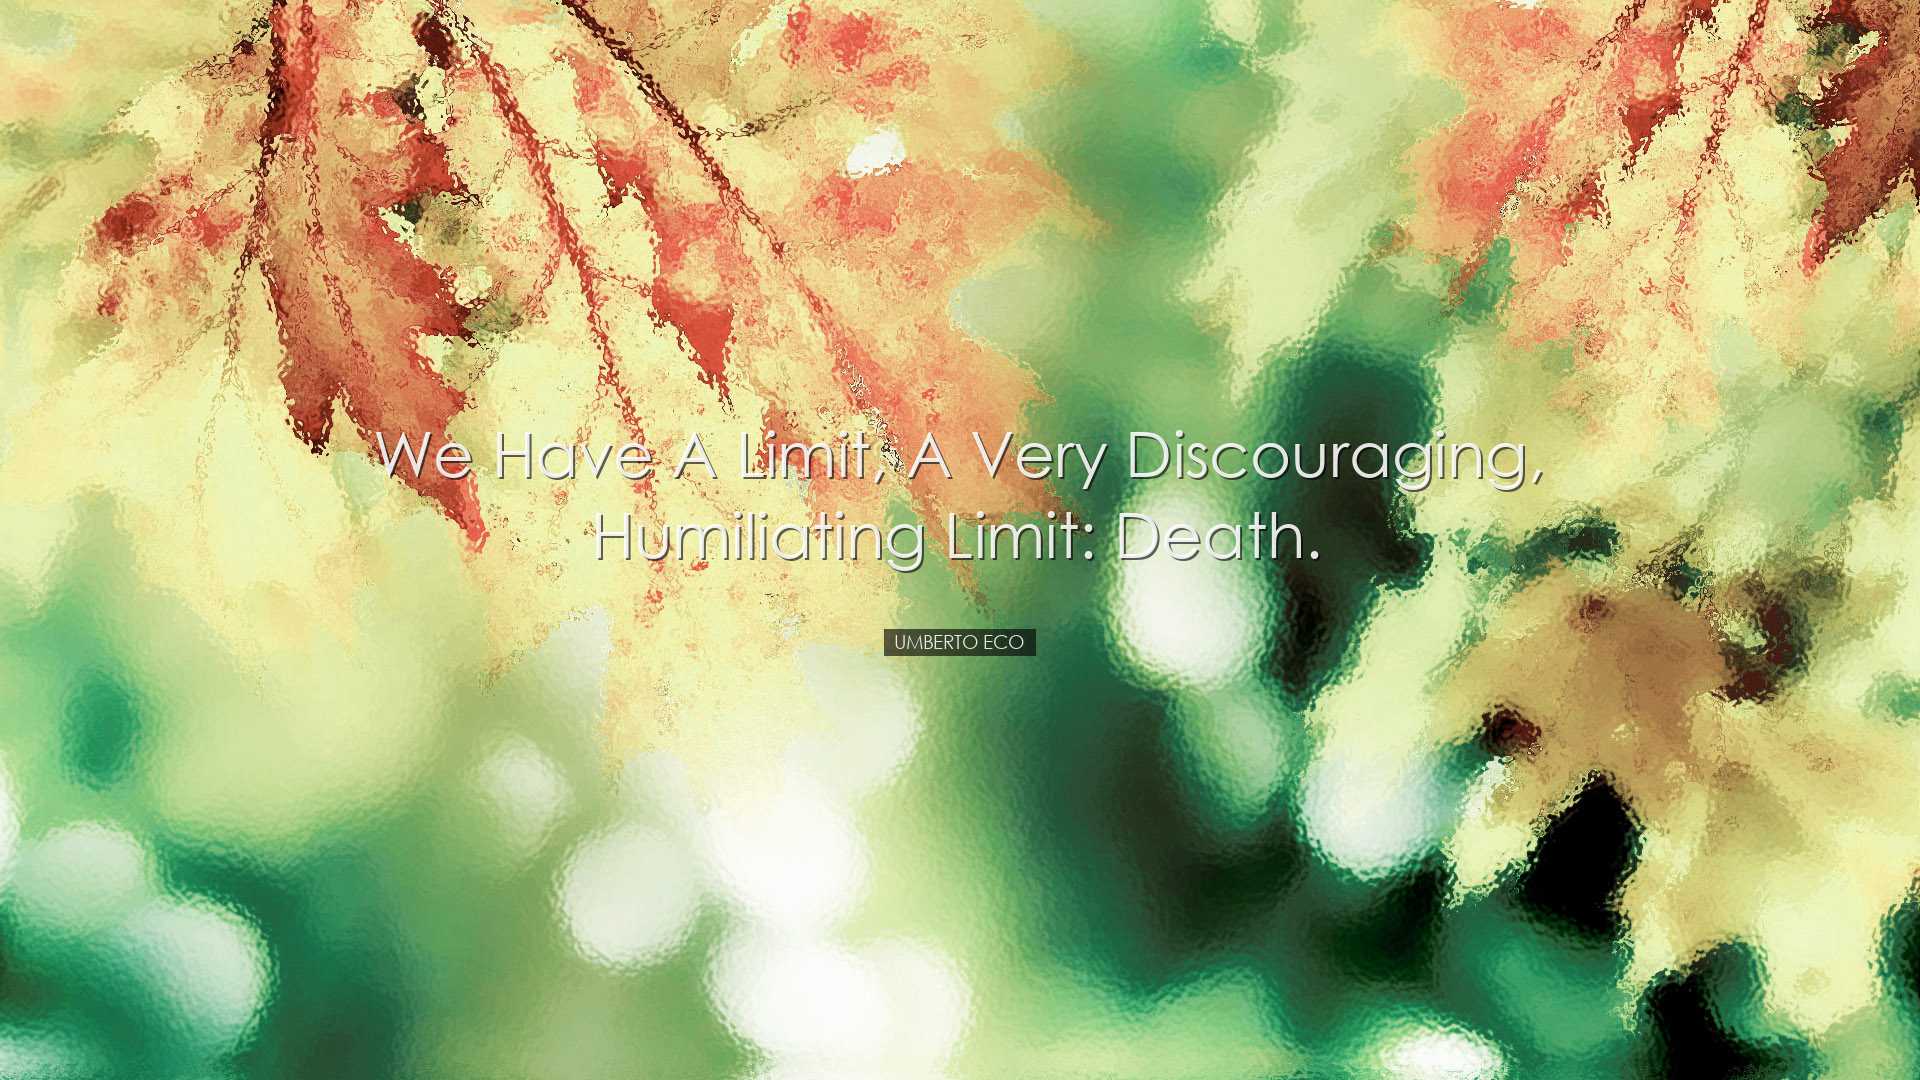 We have a limit, a very discouraging, humiliating limit: death. -